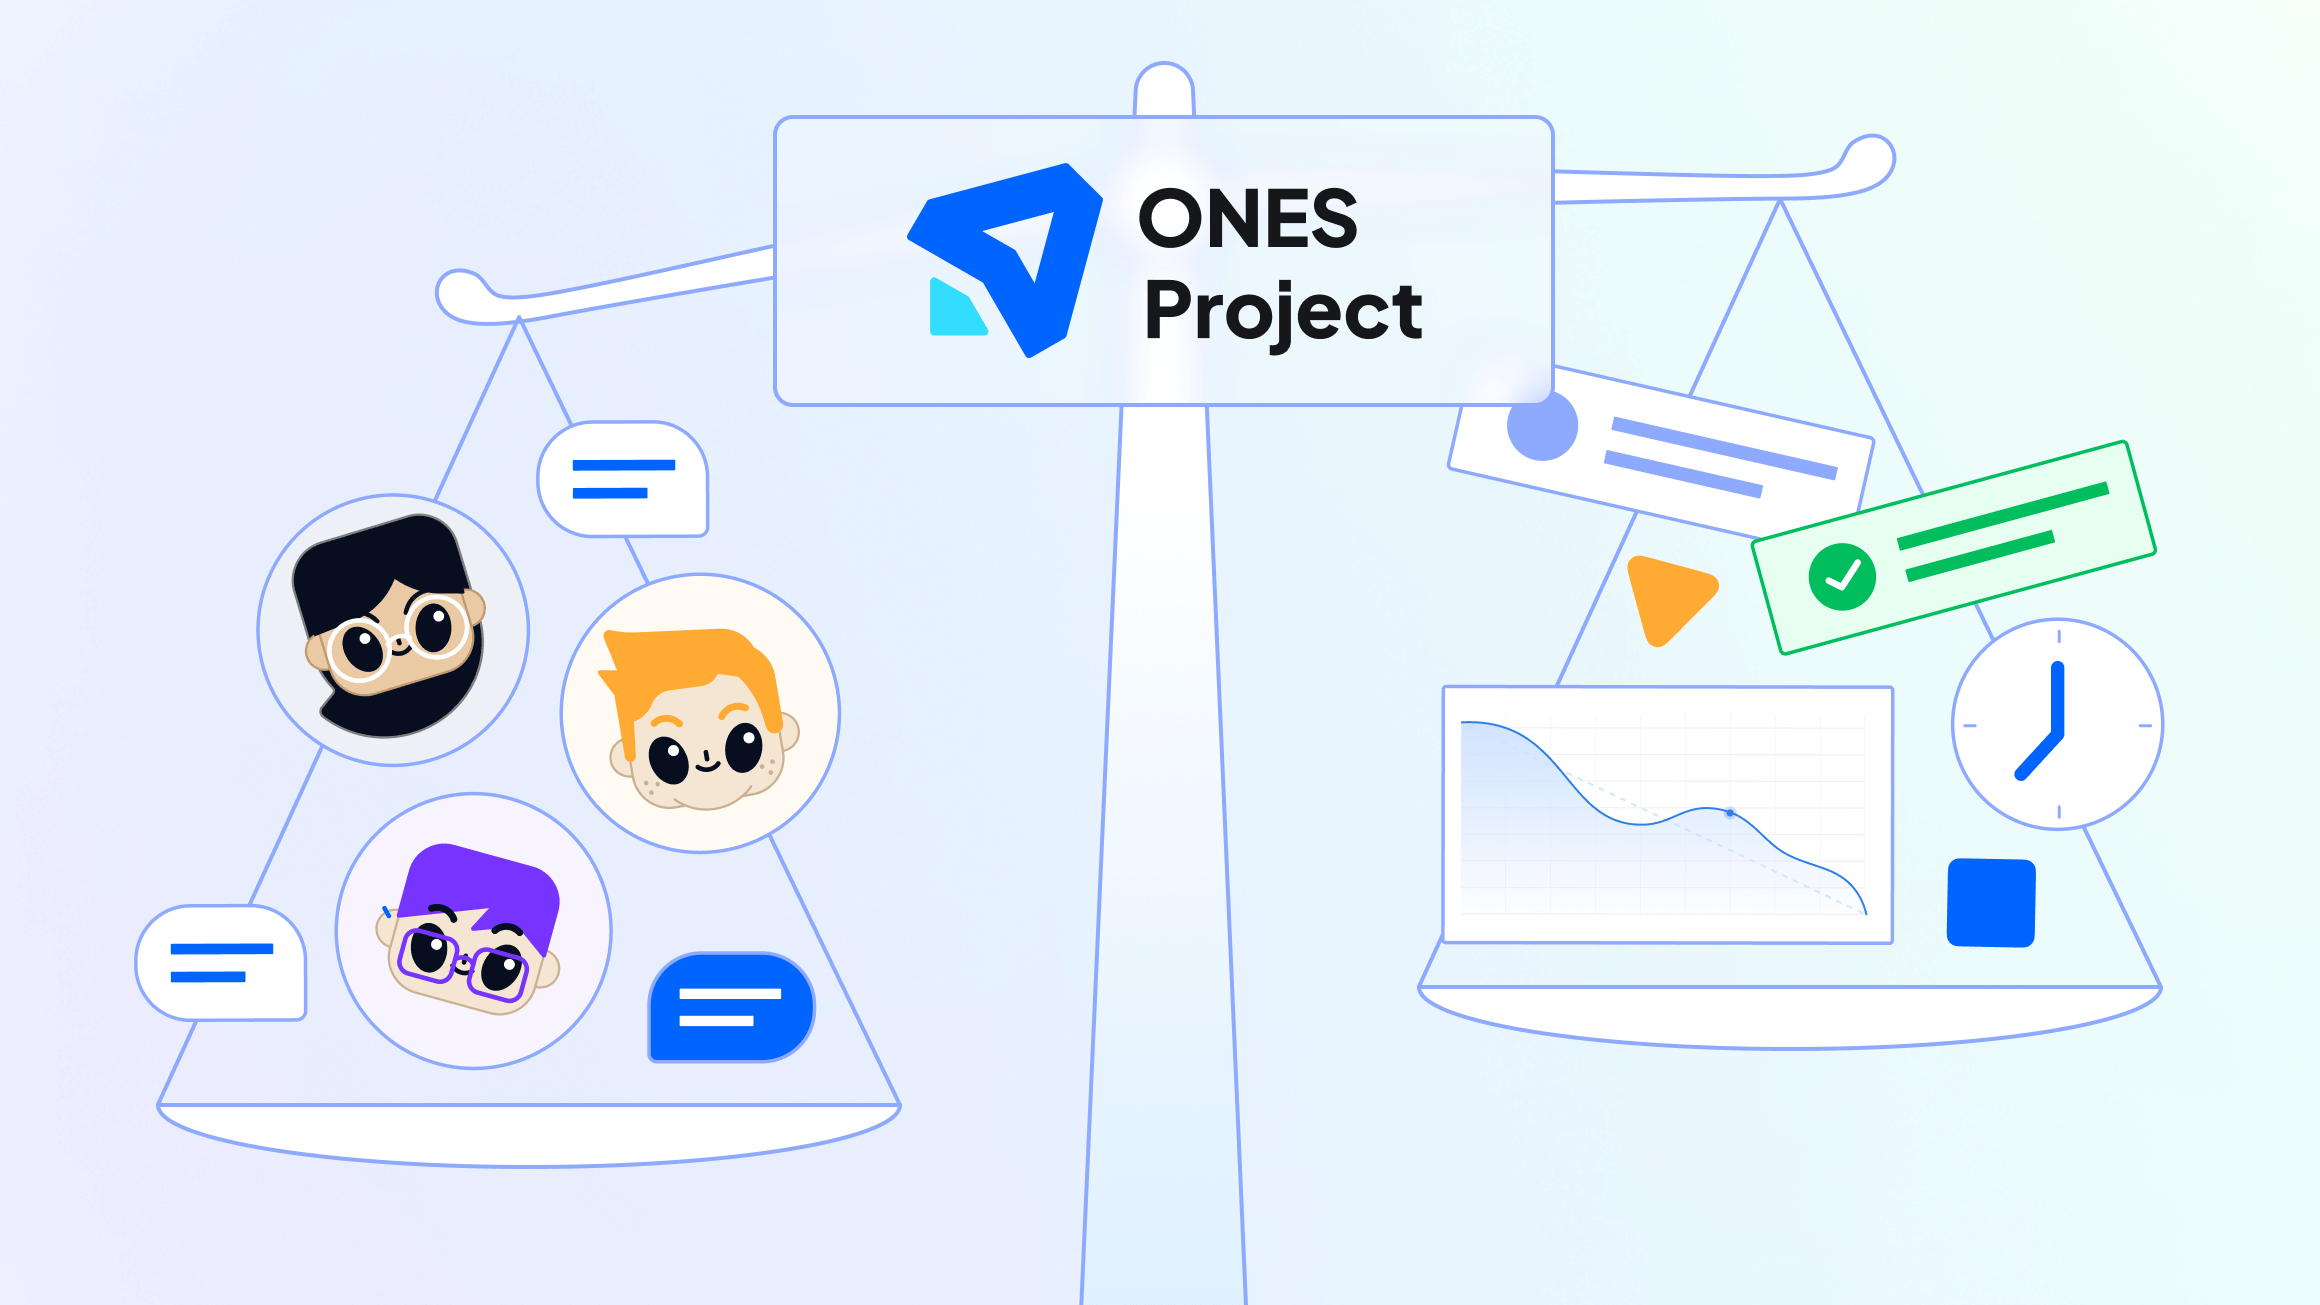 2 key principles of ONES Project